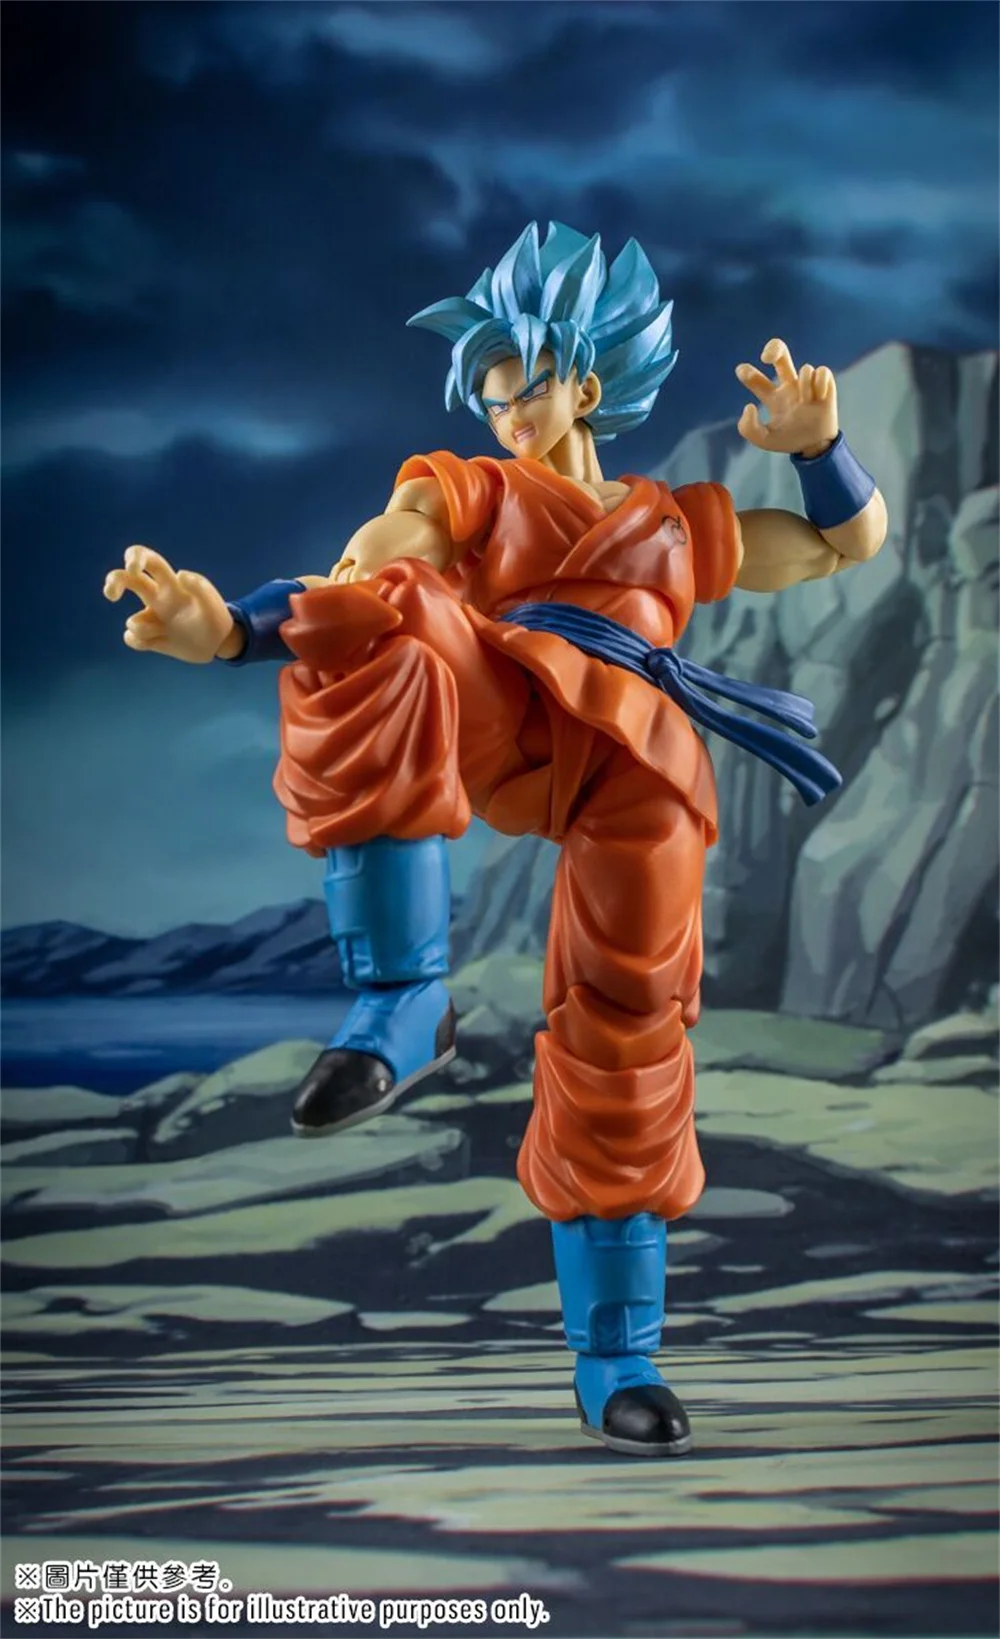 Anime Figure Dragon Ball Anime Demoniacal Fit SHF Counterattacking K Weiss  SSJ God Goku Action Model Toys For Boys